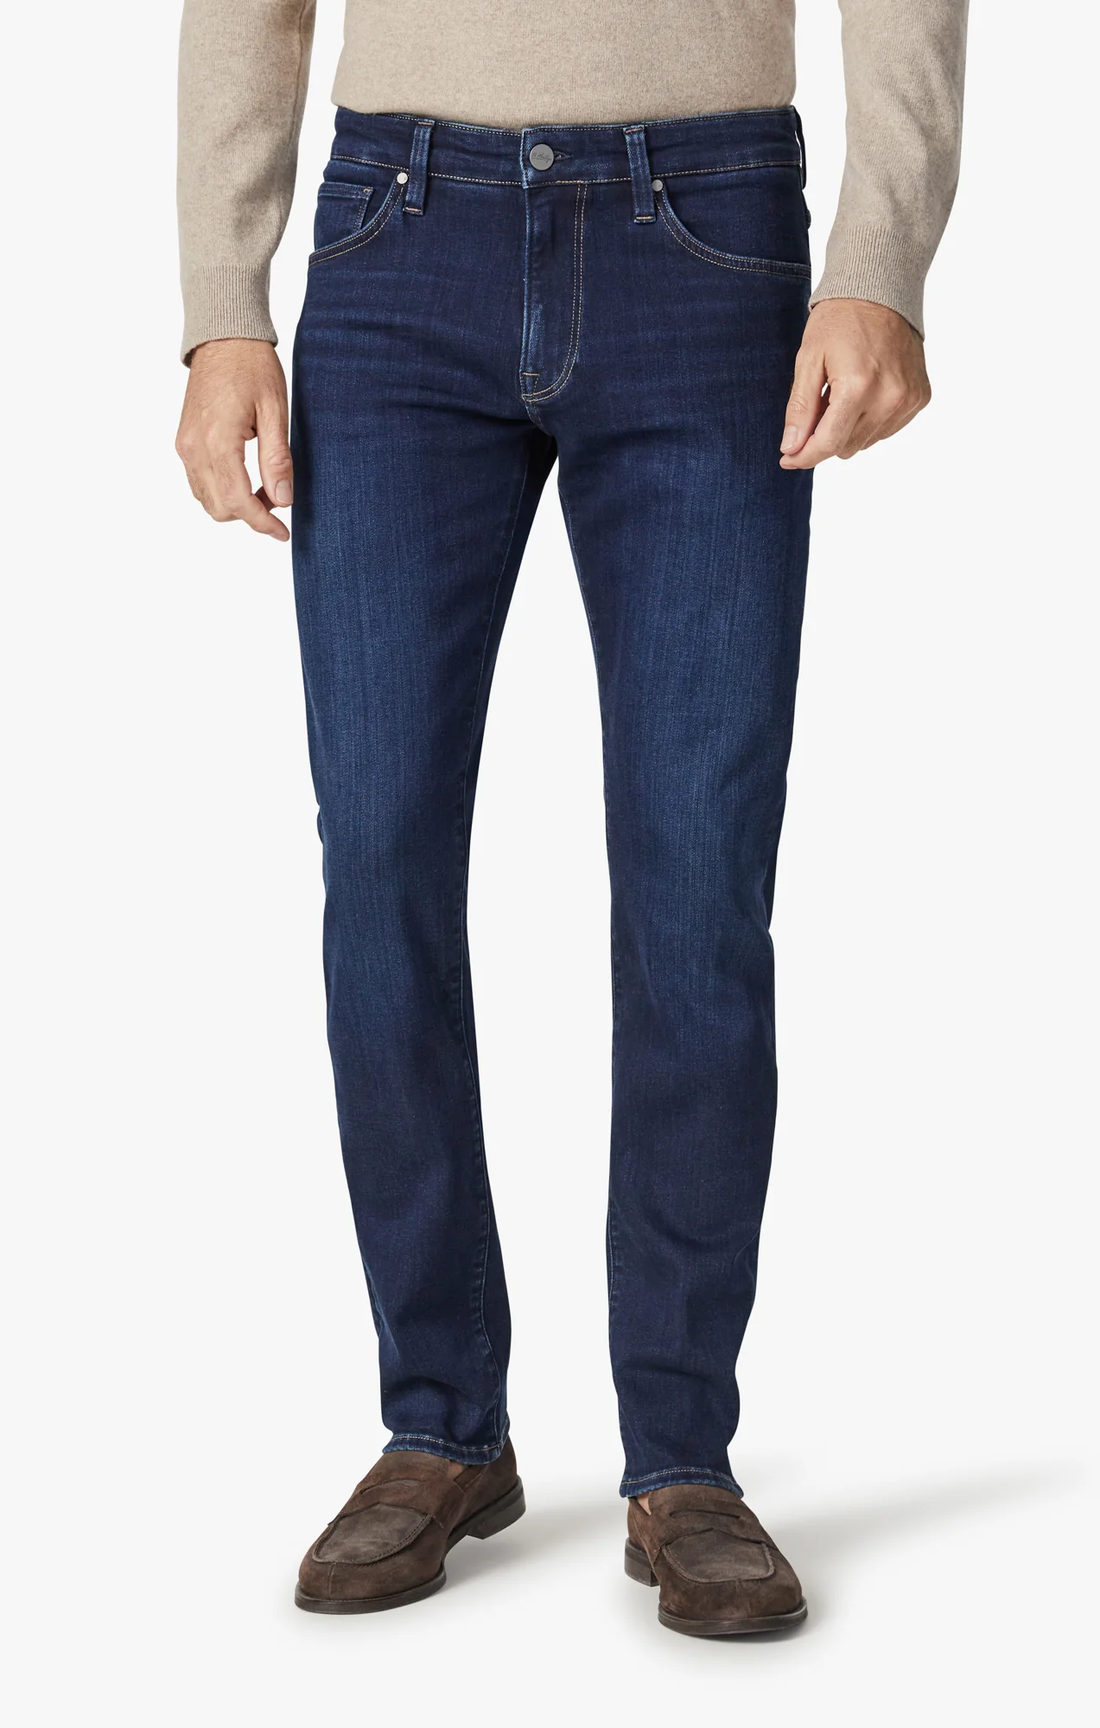 Courage Organic Jeans